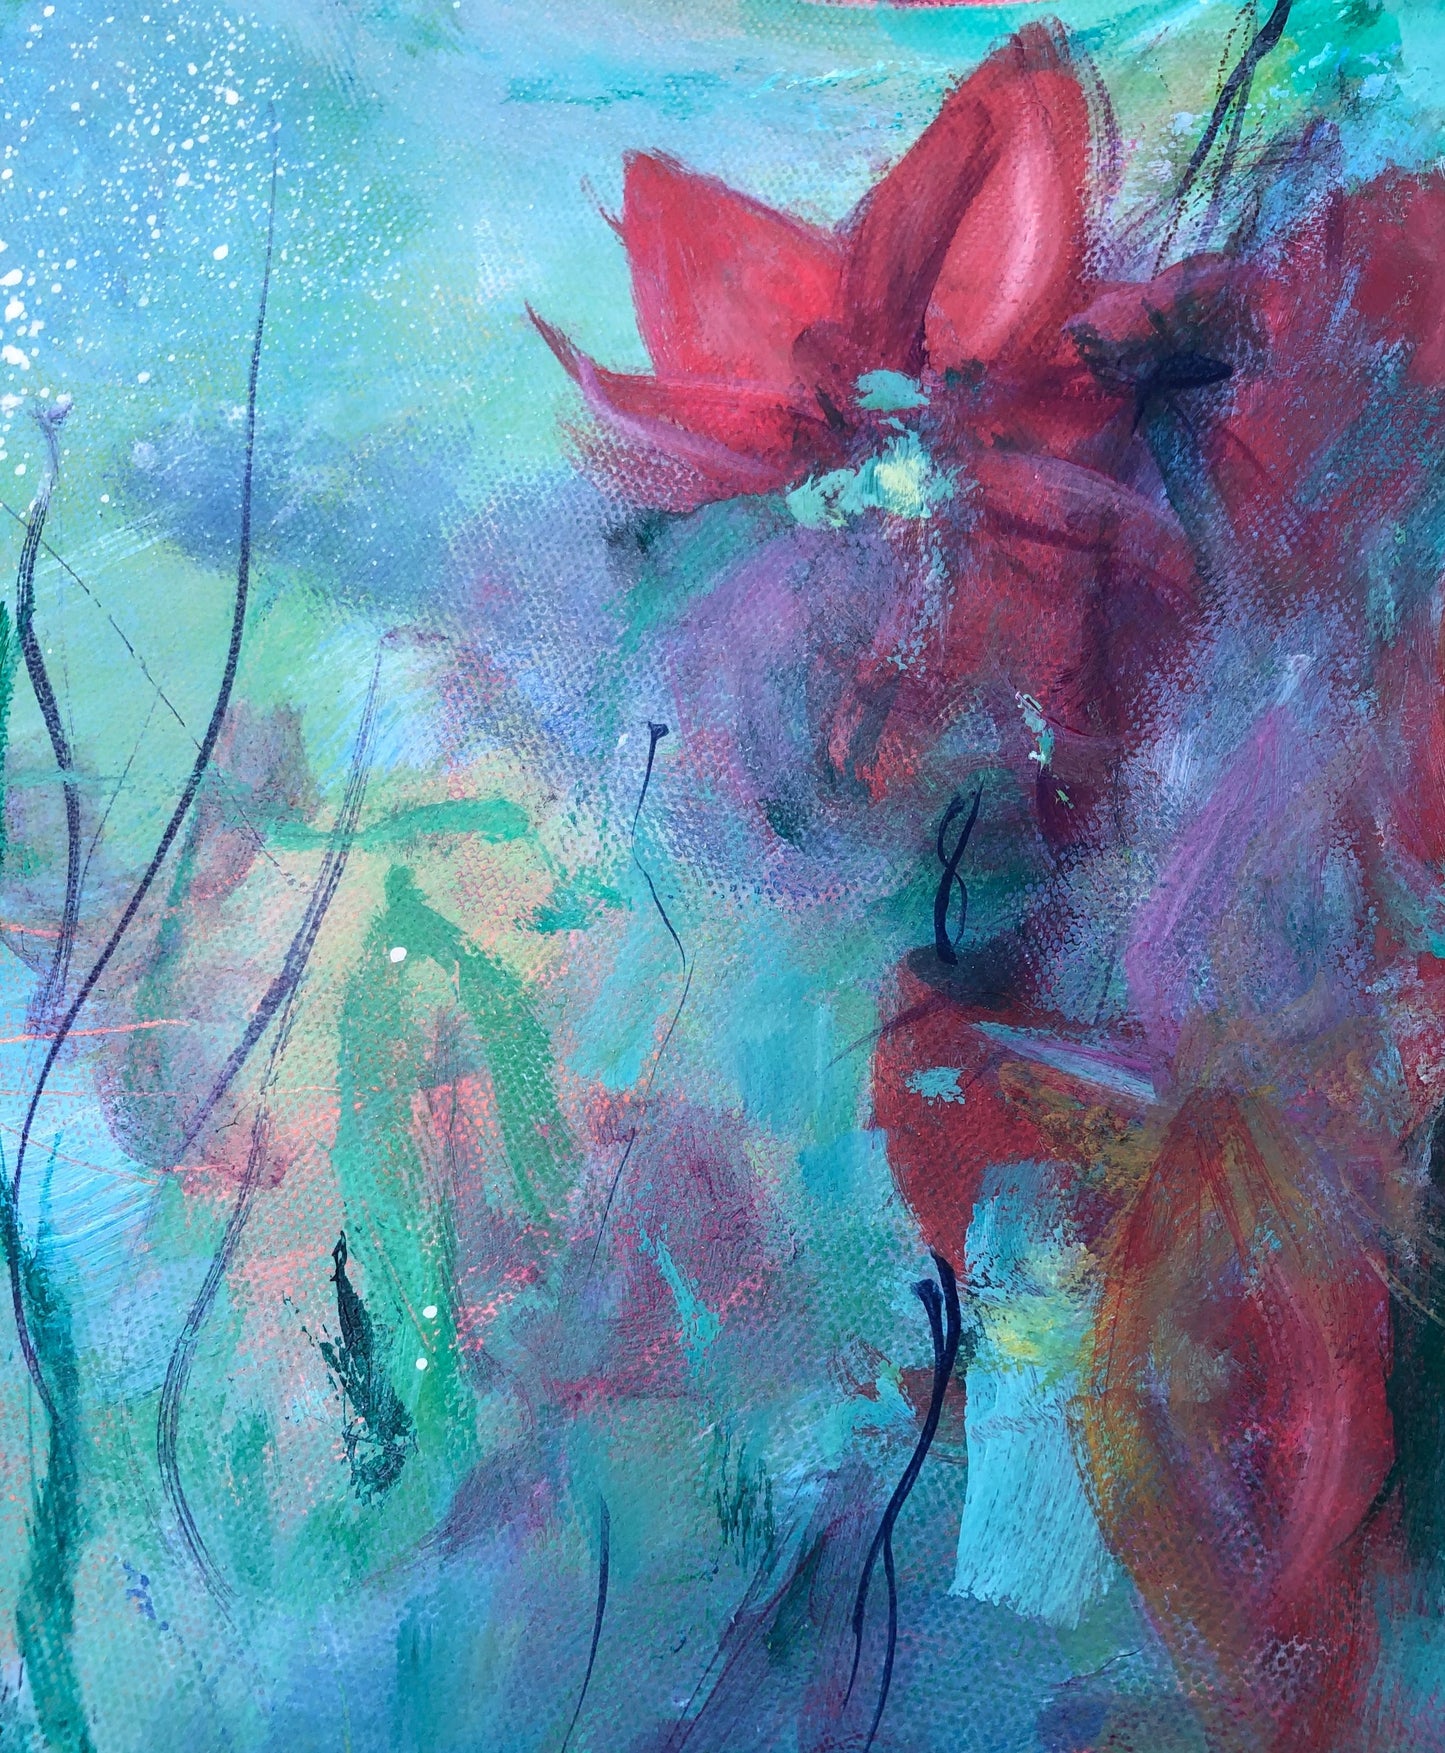 Close up detail of hazy background flowers on original painting called Joy.